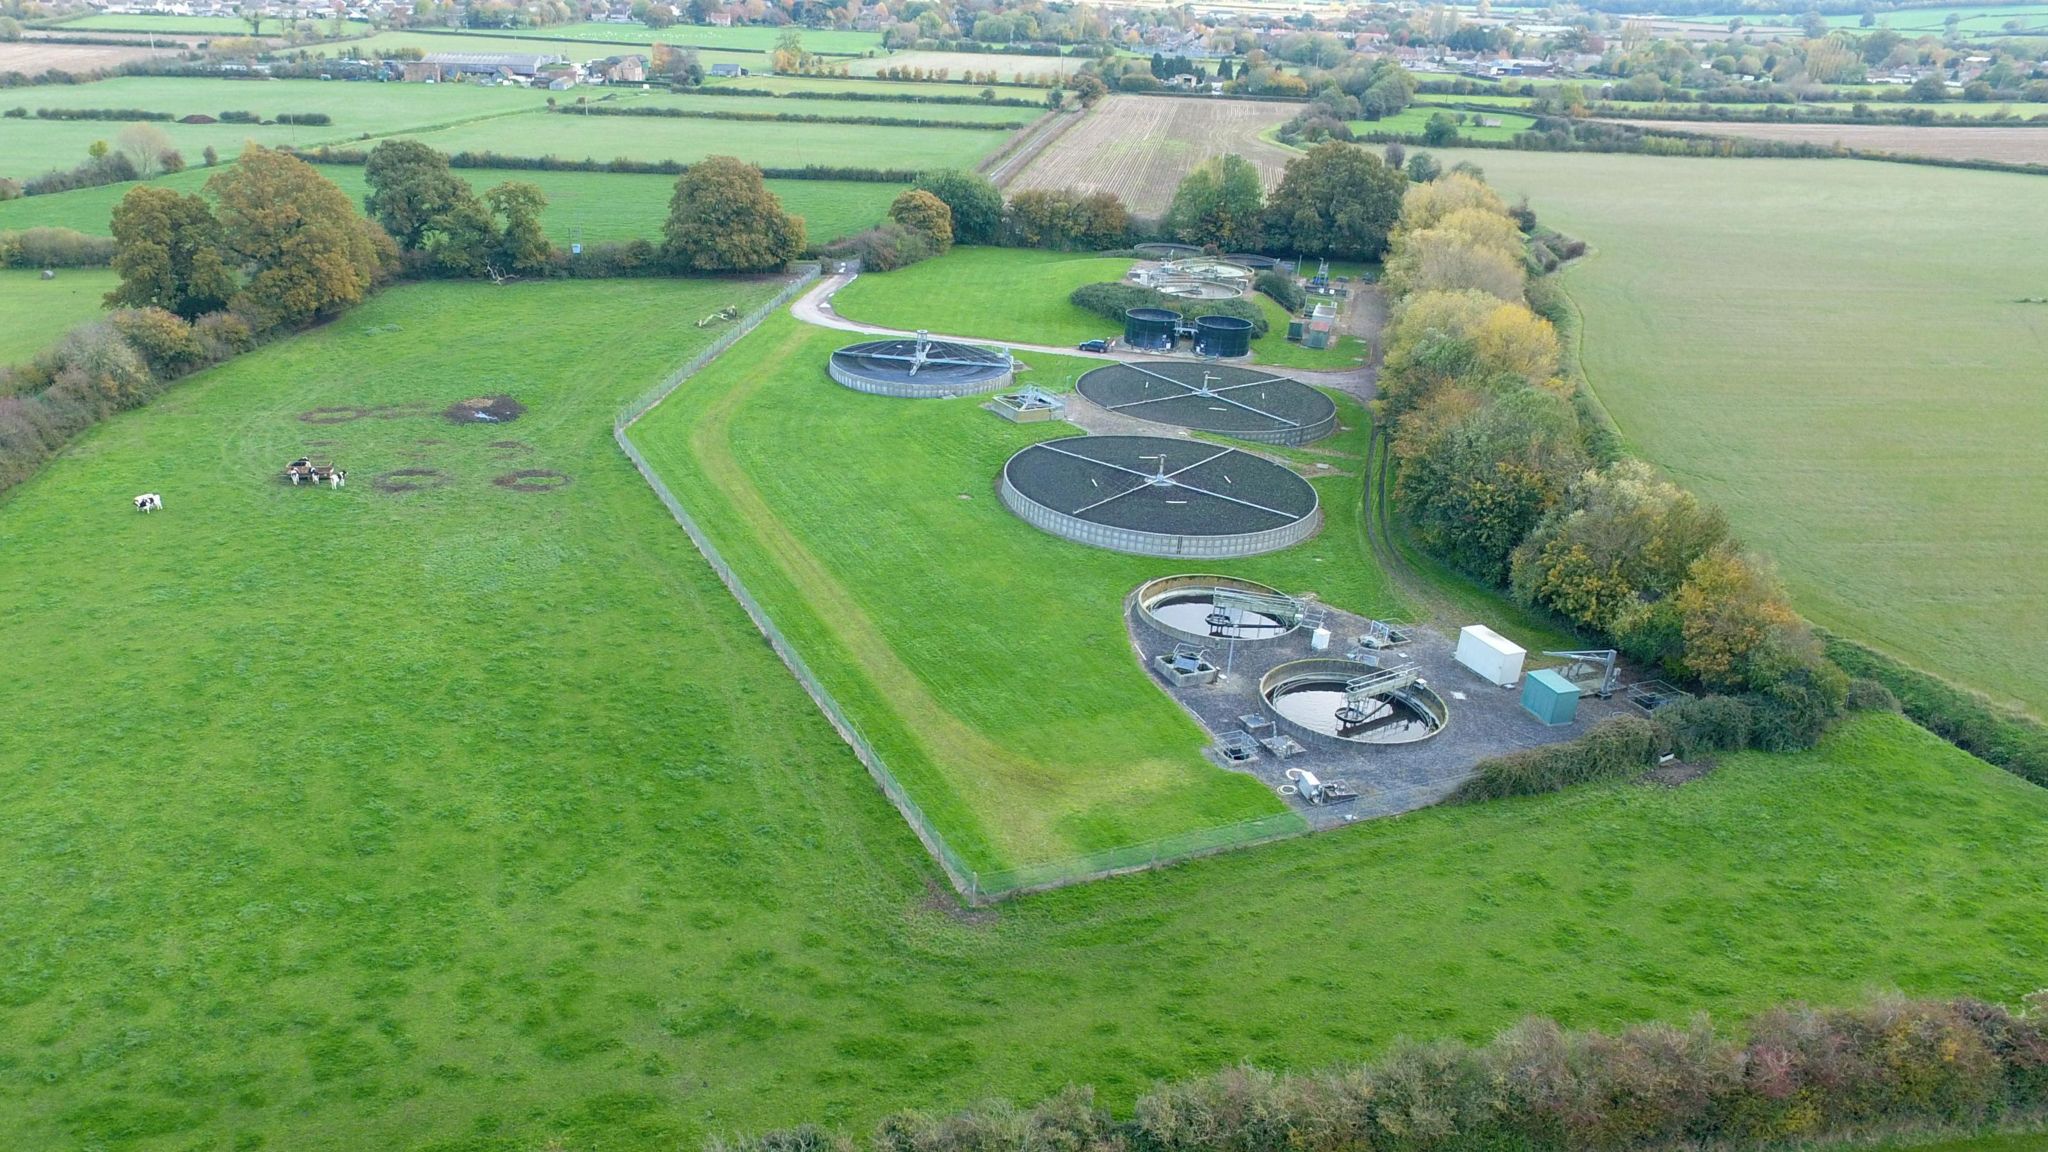 The water recycling centre at Martock